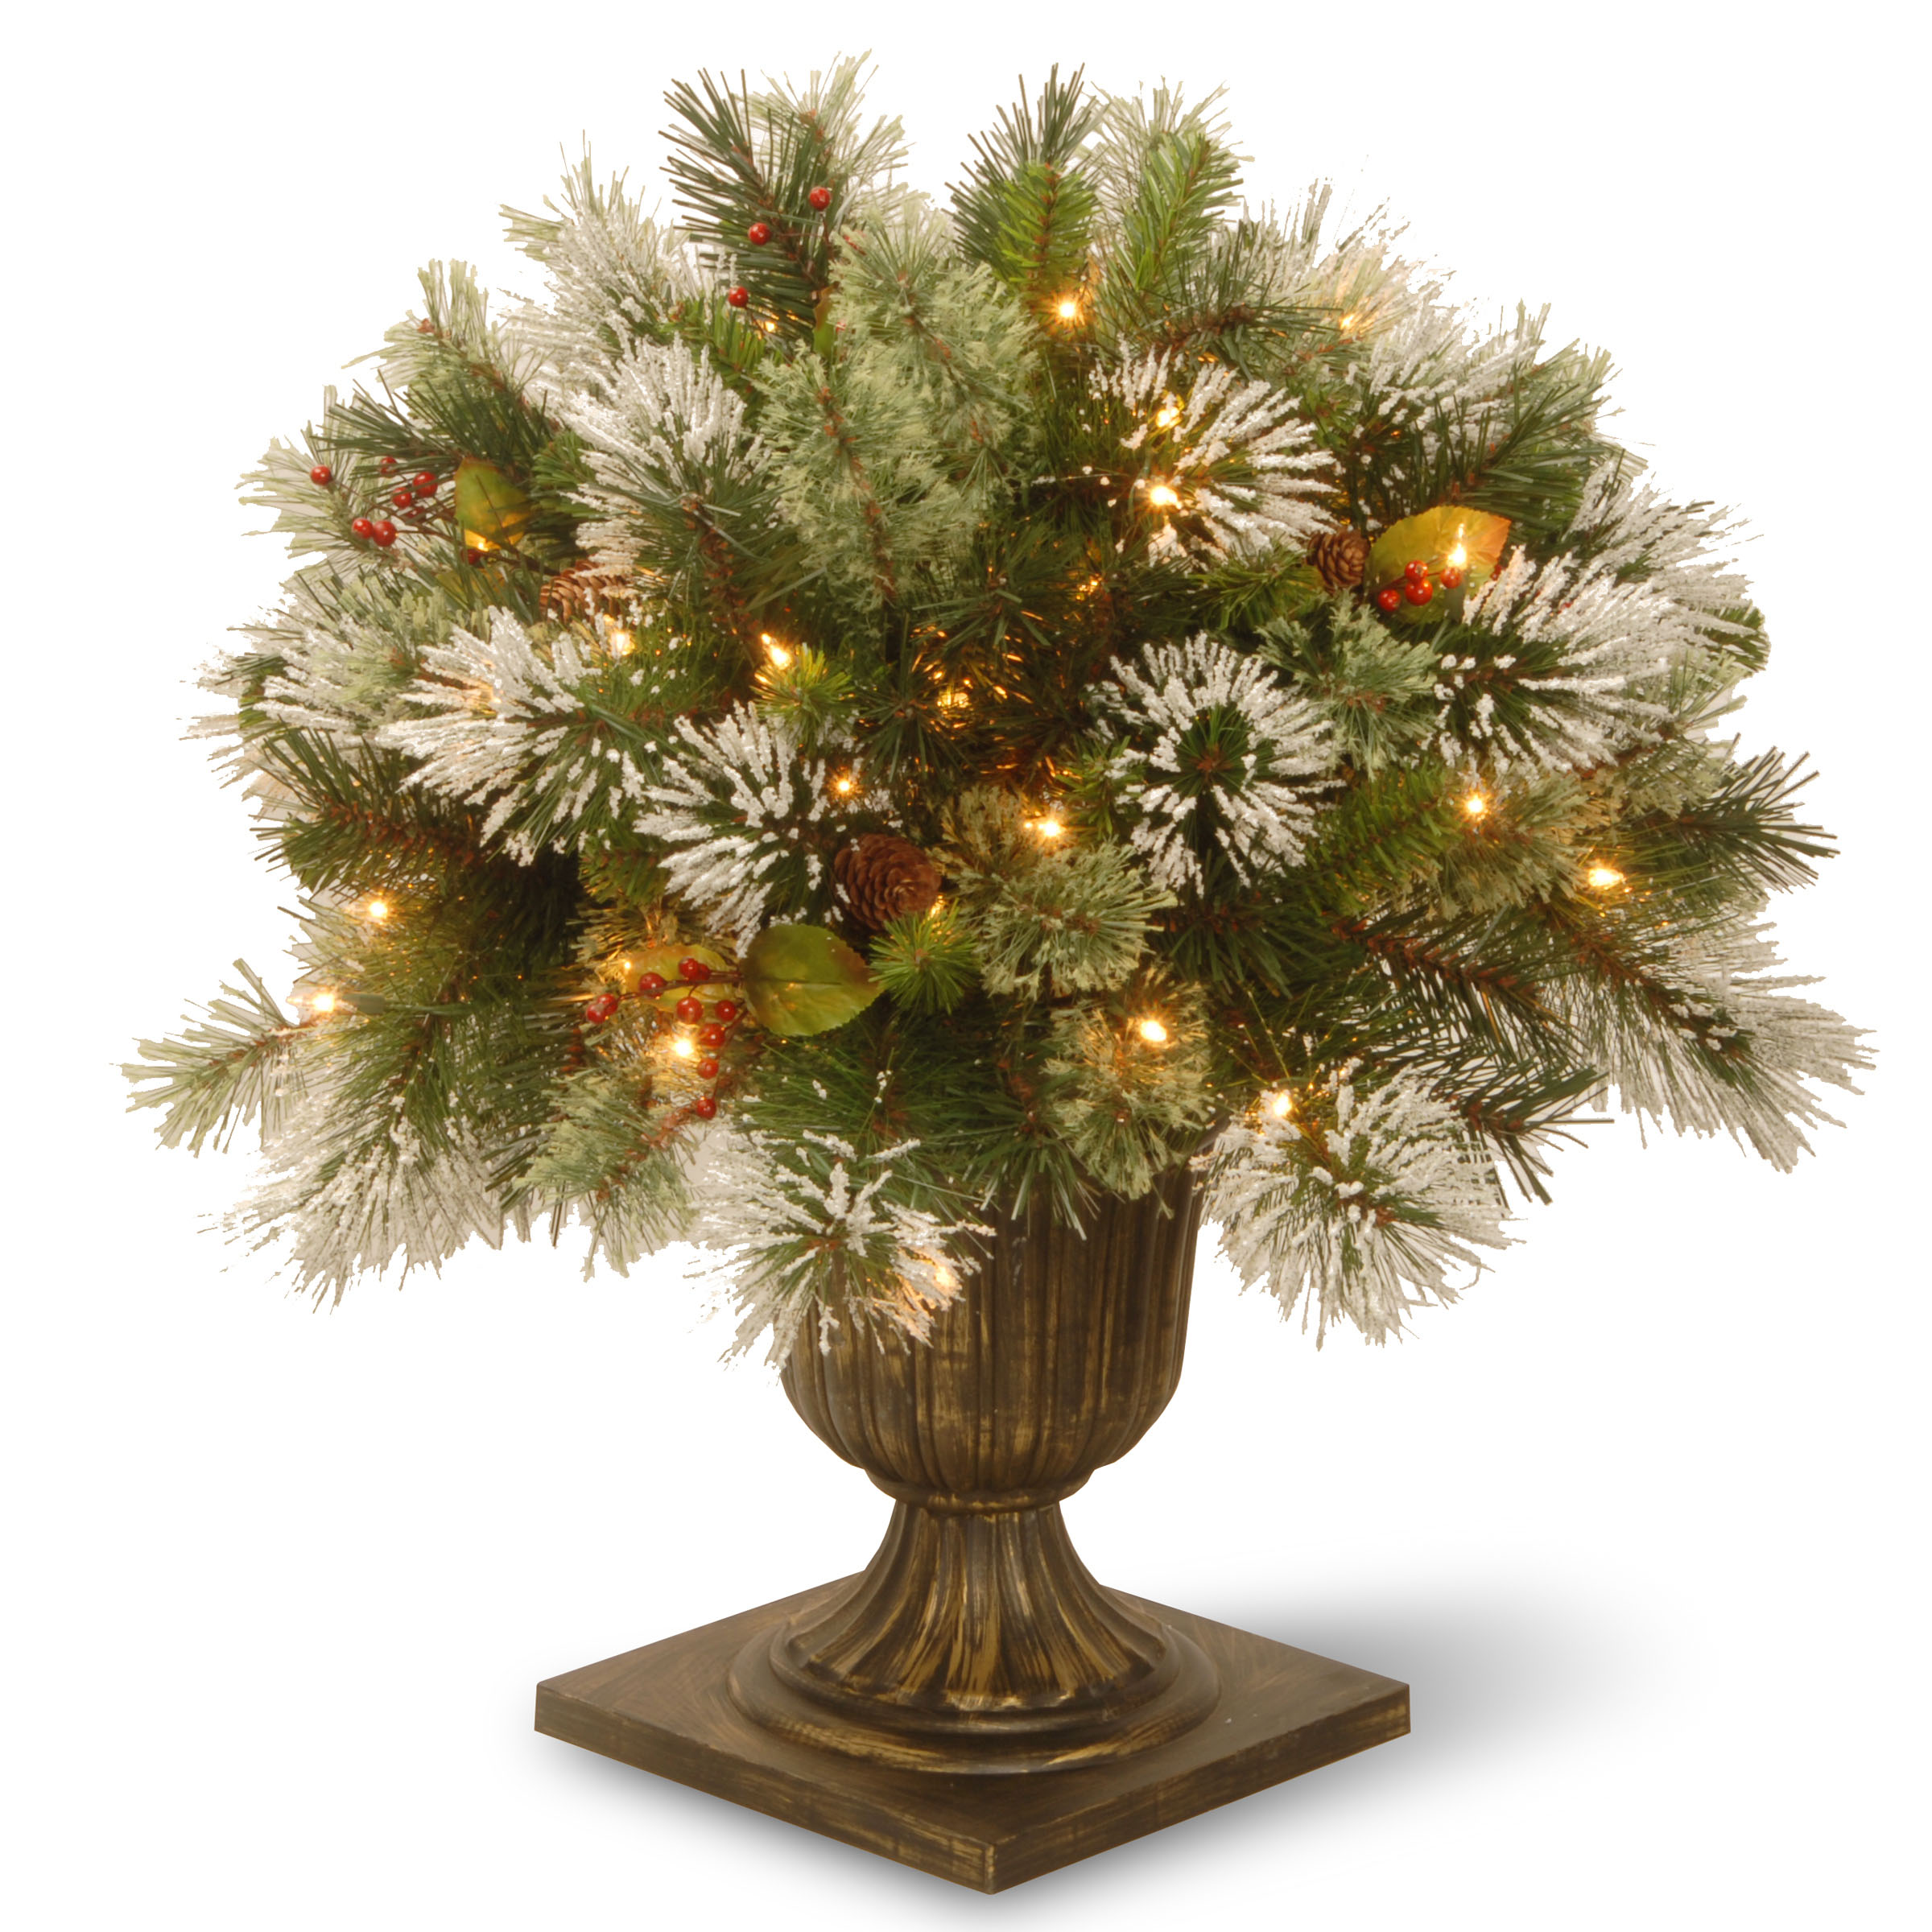 24 Inch Wintry Pine Porch Bush In Urn: Cones, Berries & Clear Lights